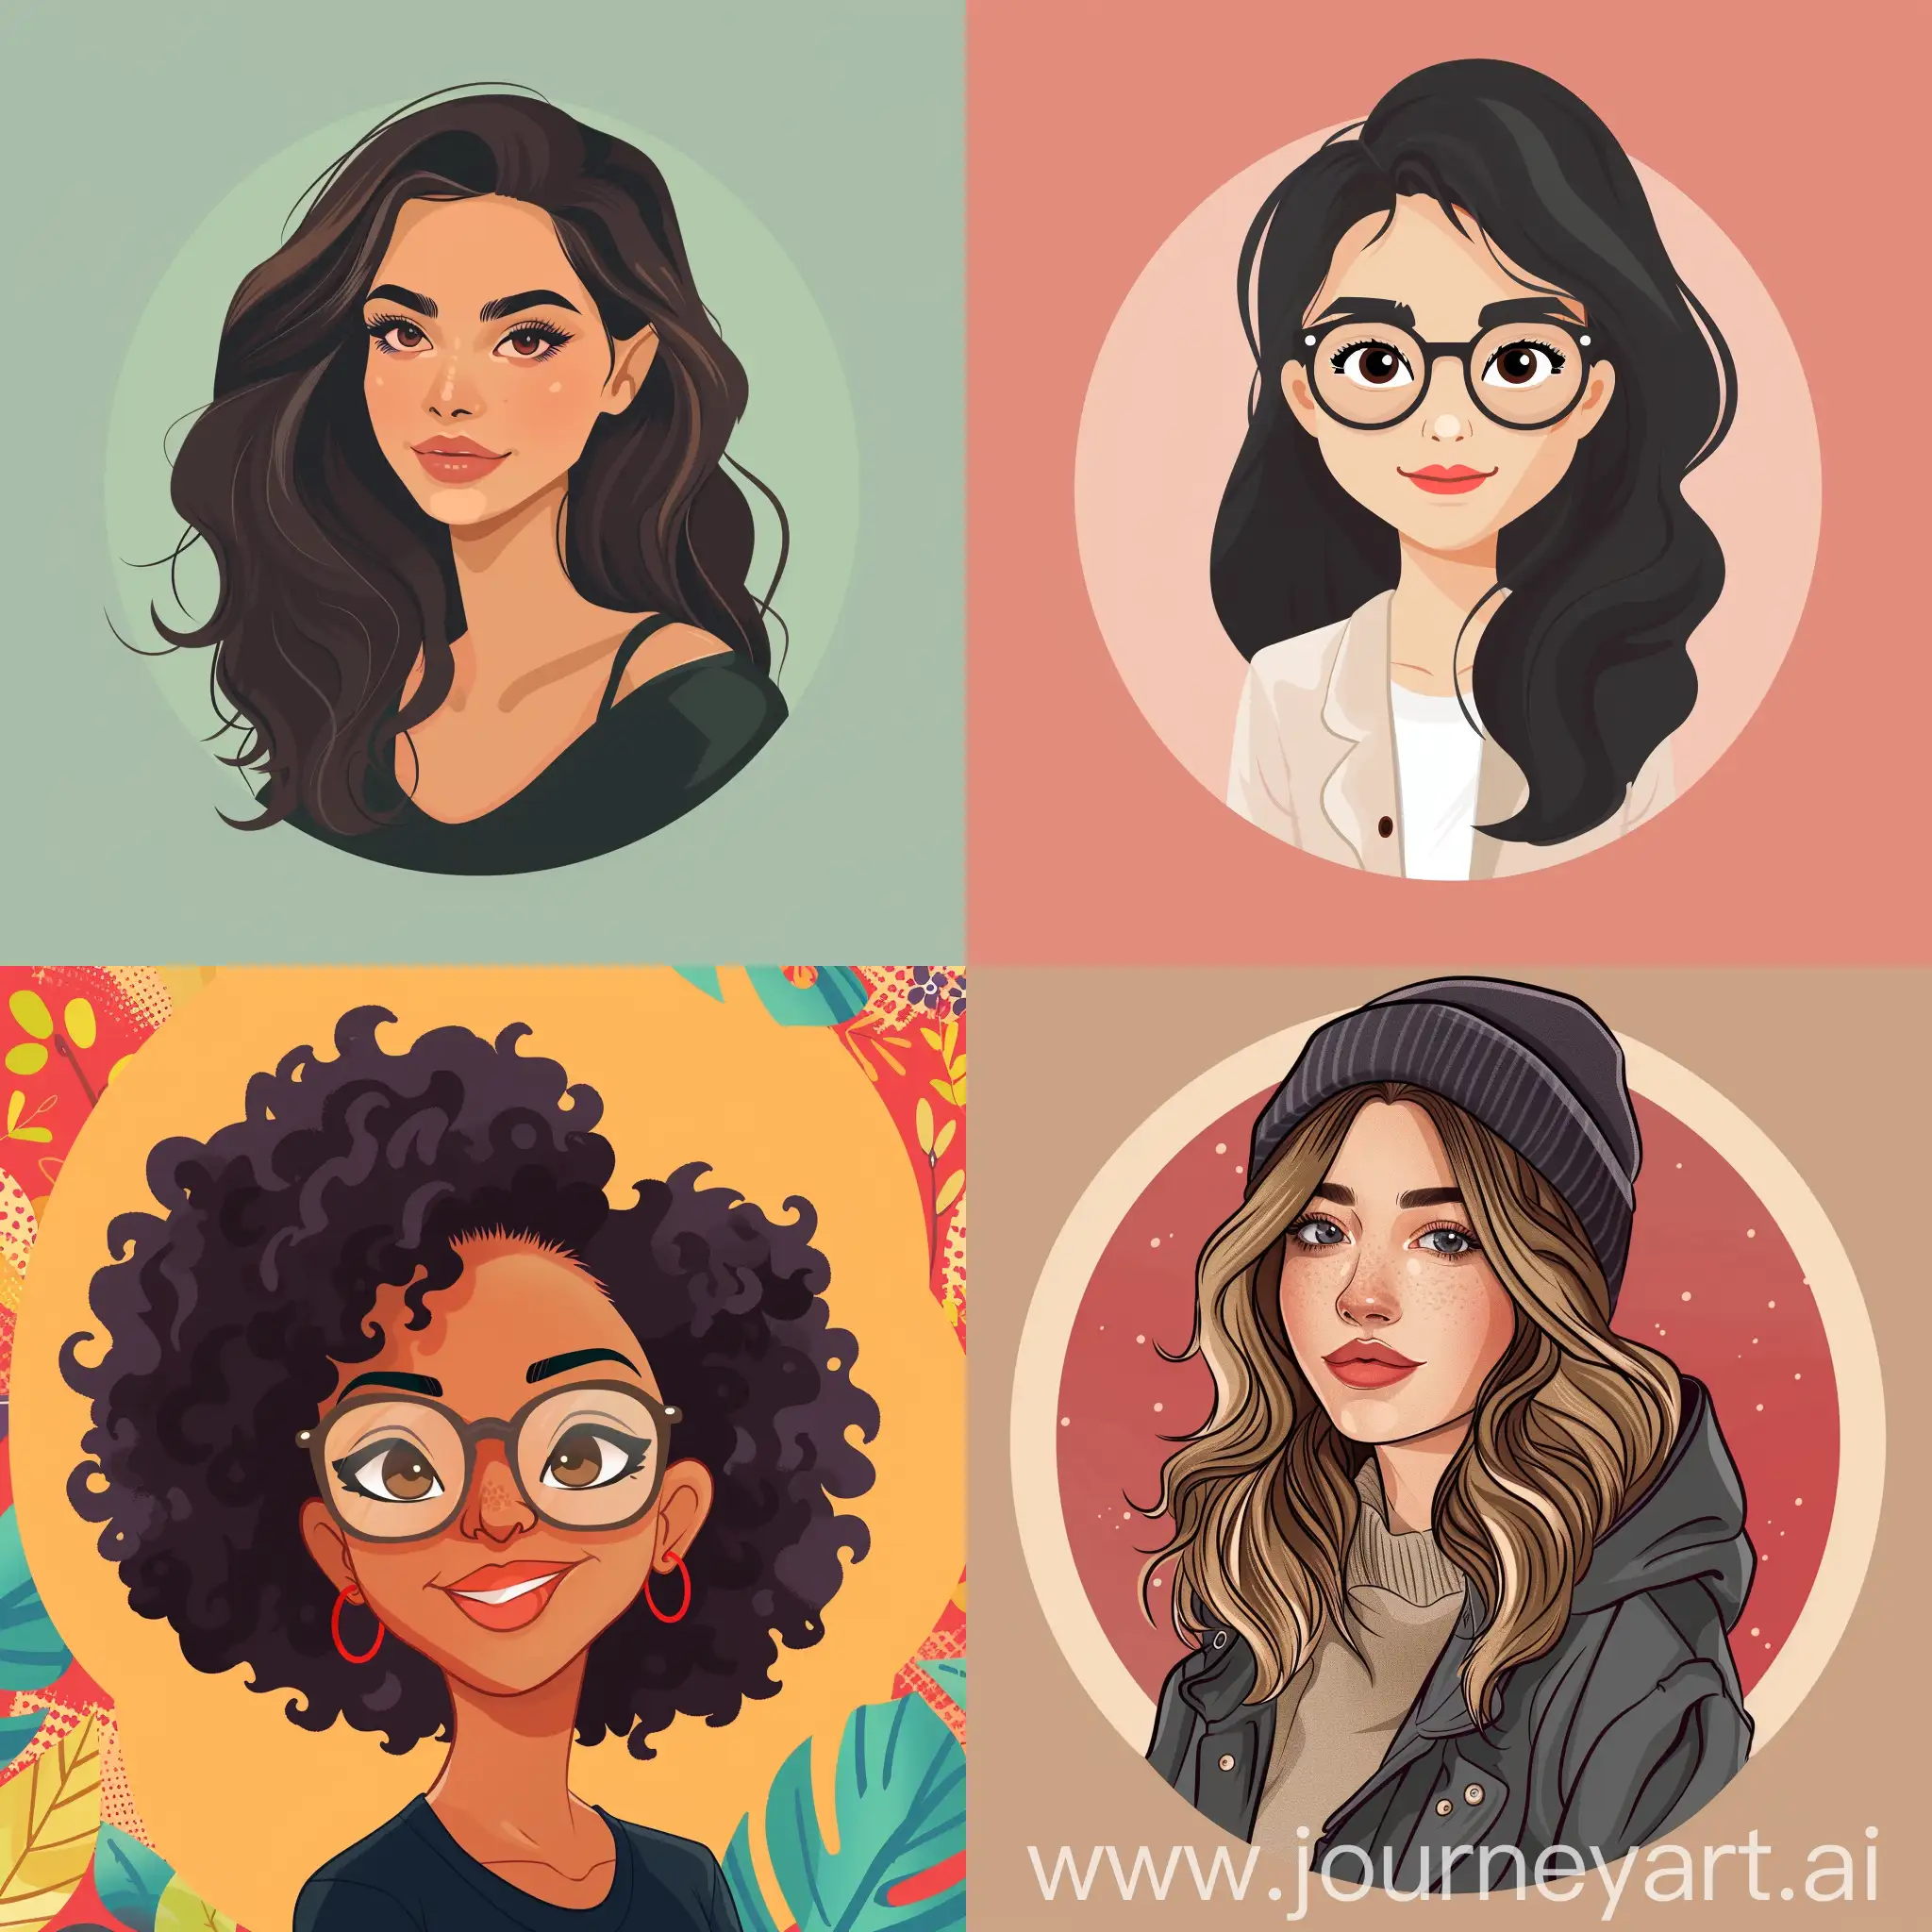 Fresh-Young-Social-Media-Avatar-Design-with-Vibrant-Colors